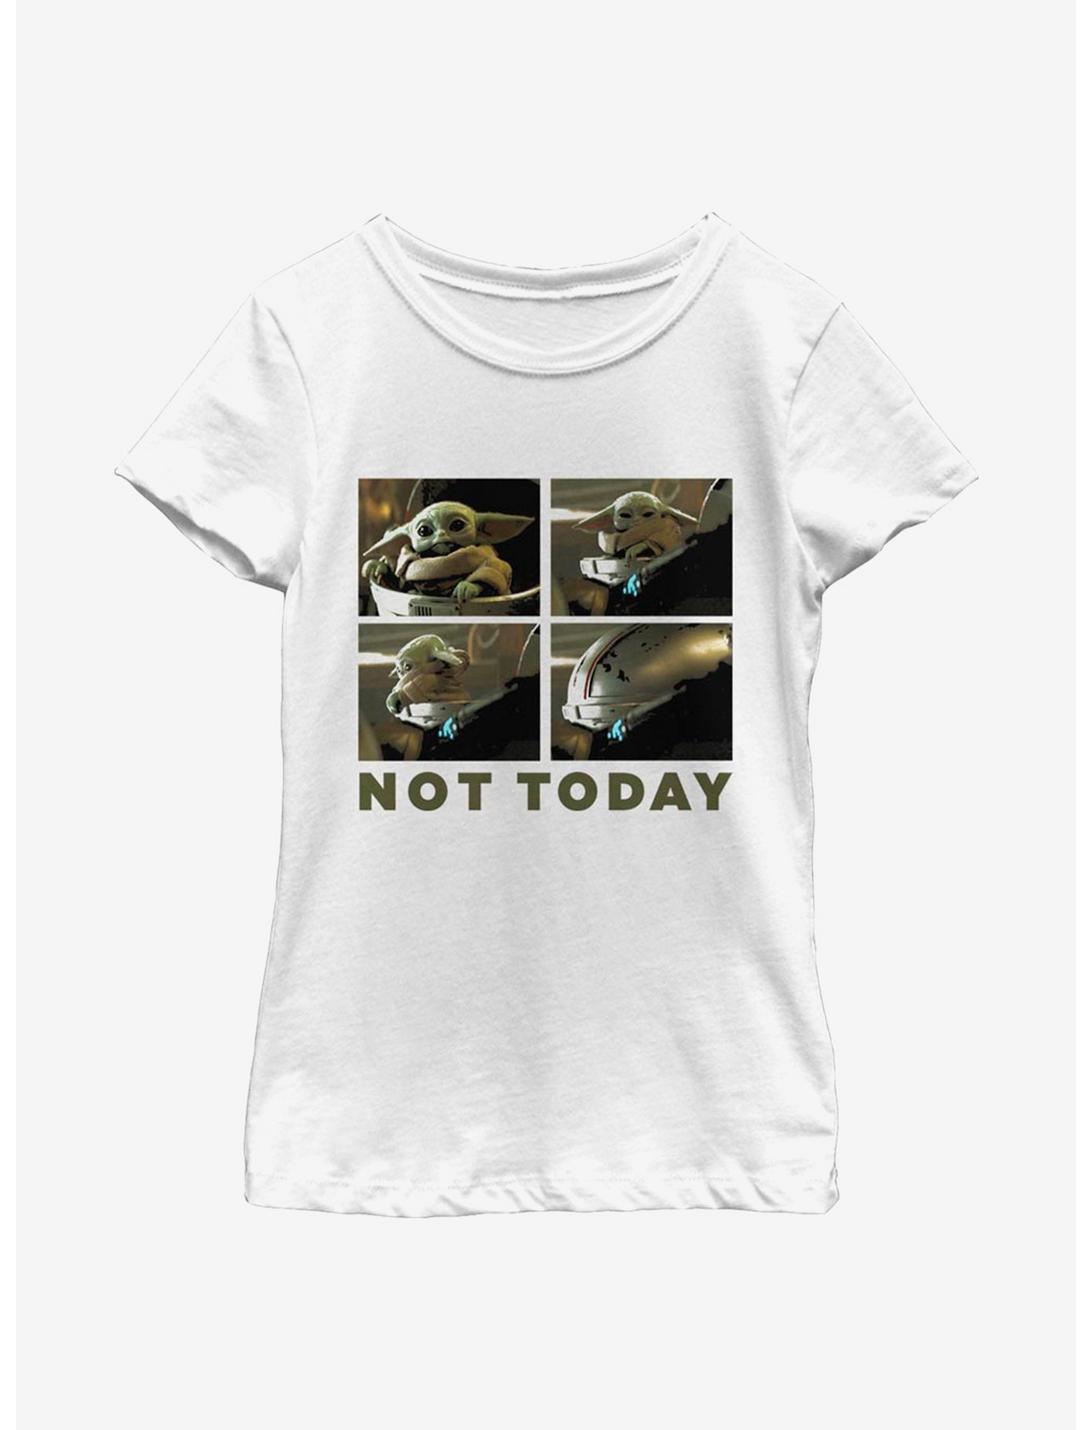 Star Wars The Mandalorian The Child Not Today Youth Girls T-Shirt, WHITE, hi-res